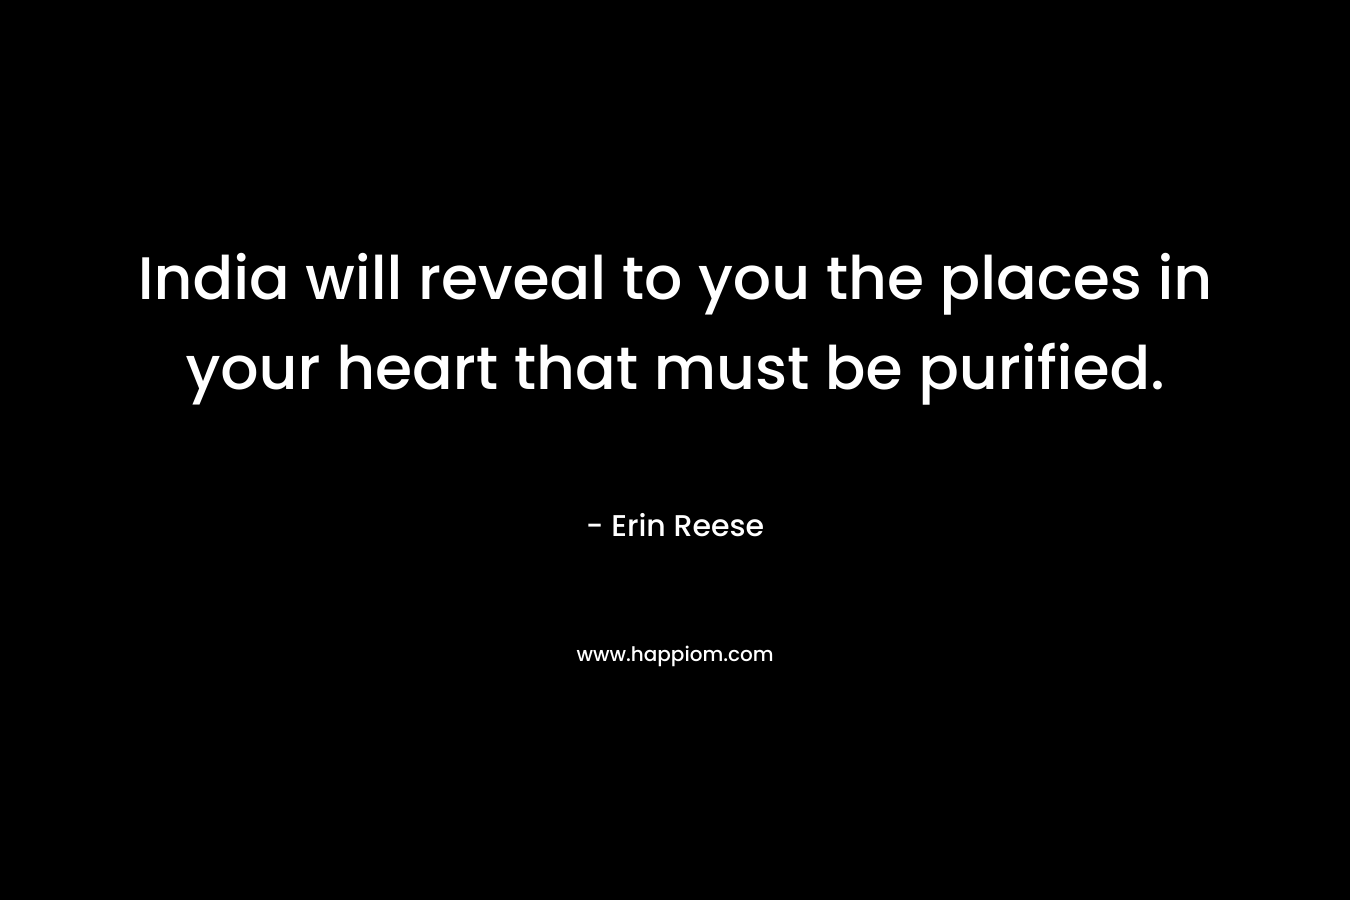 India will reveal to you the places in your heart that must be purified. – Erin Reese